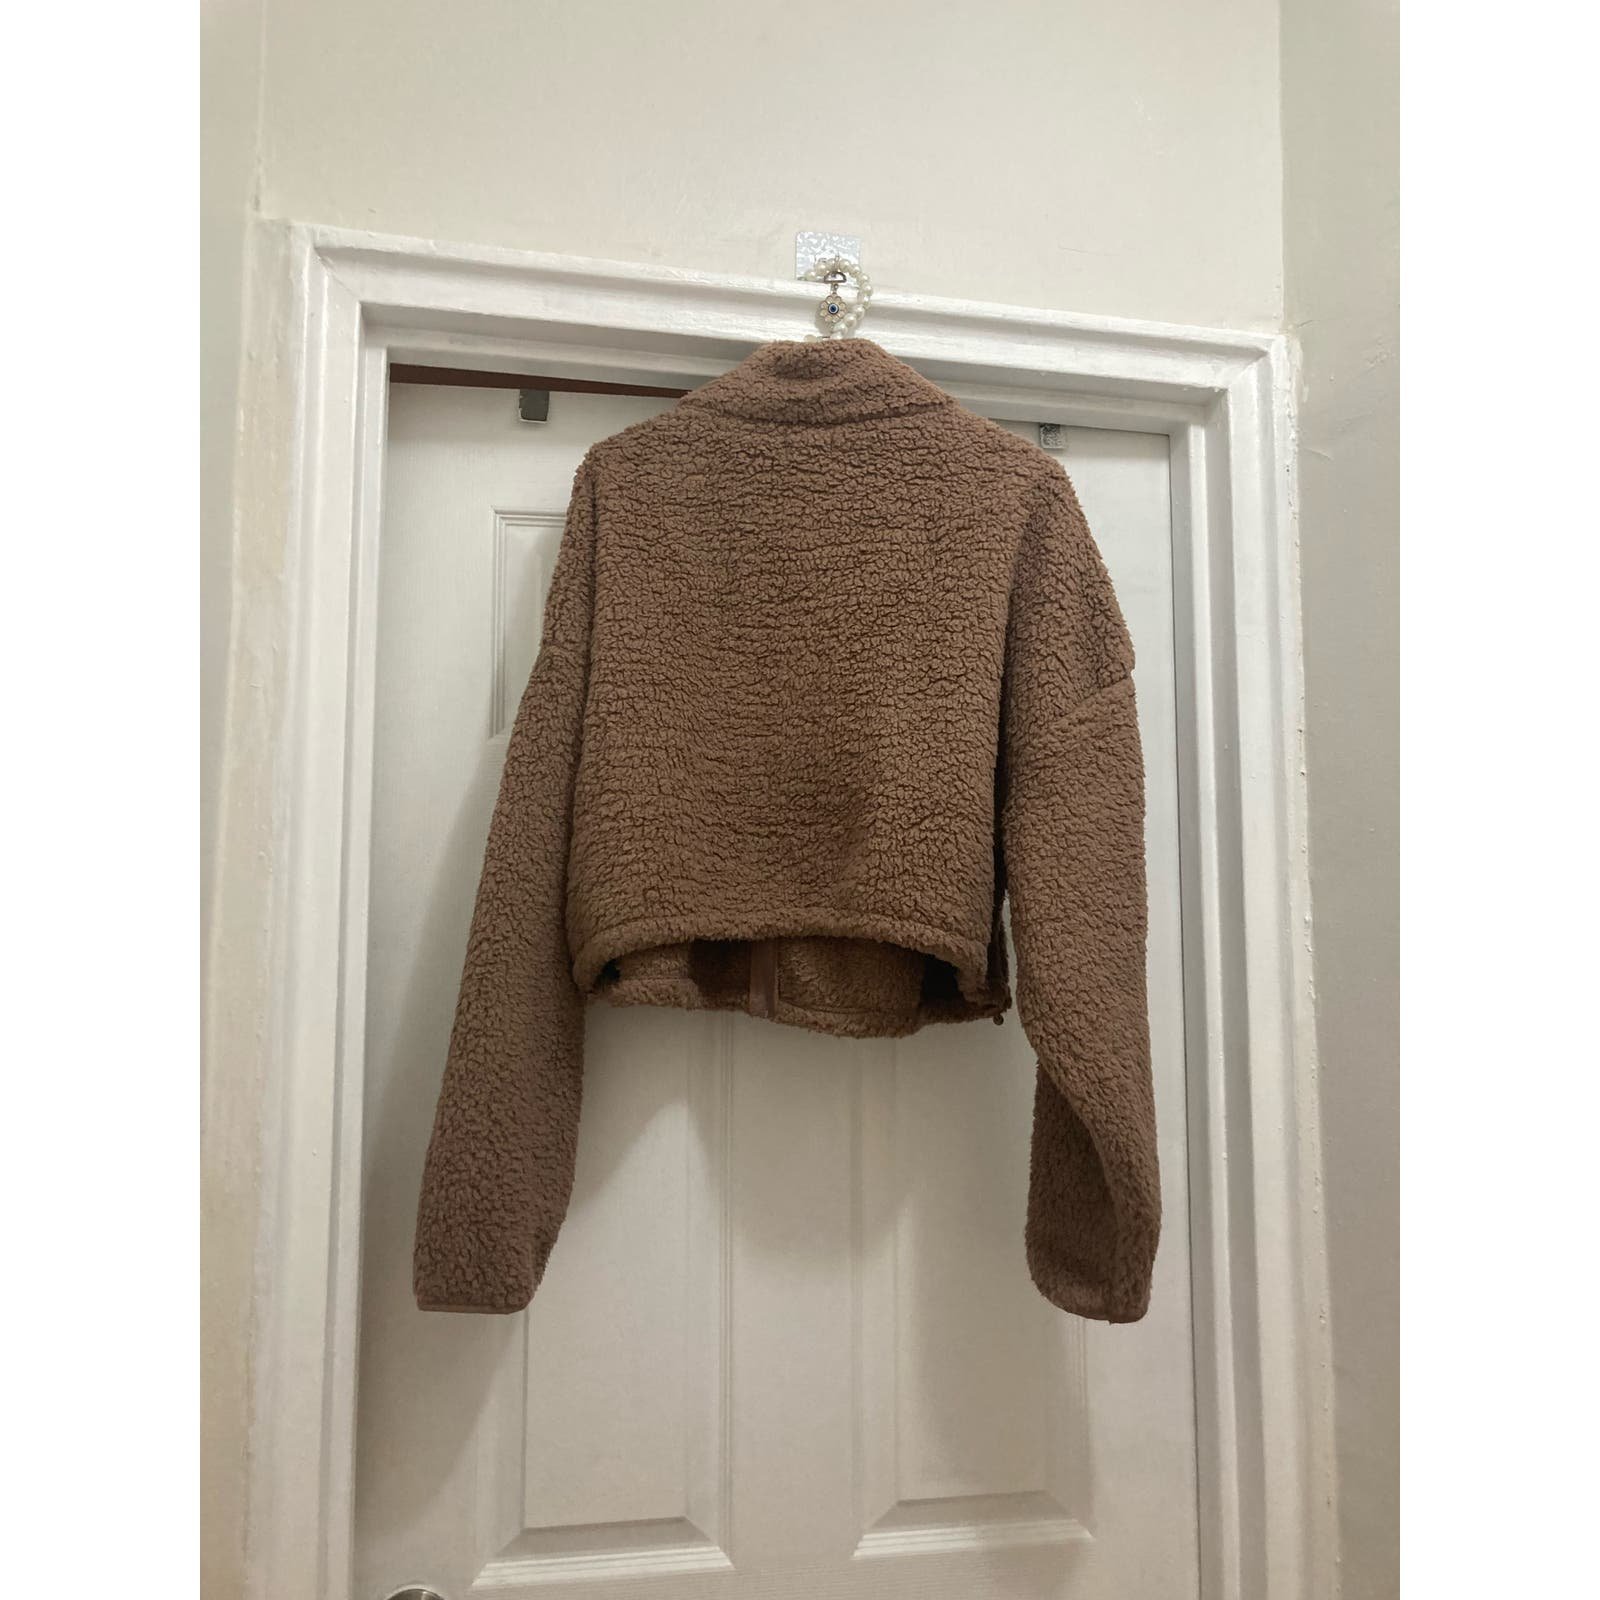 cheapest place to buy  SKIMS Size 3X Teddy Zip Up Cropped Tigers Eye NWT fuzzy crop sweater jacket JXzLpCqwv just for you